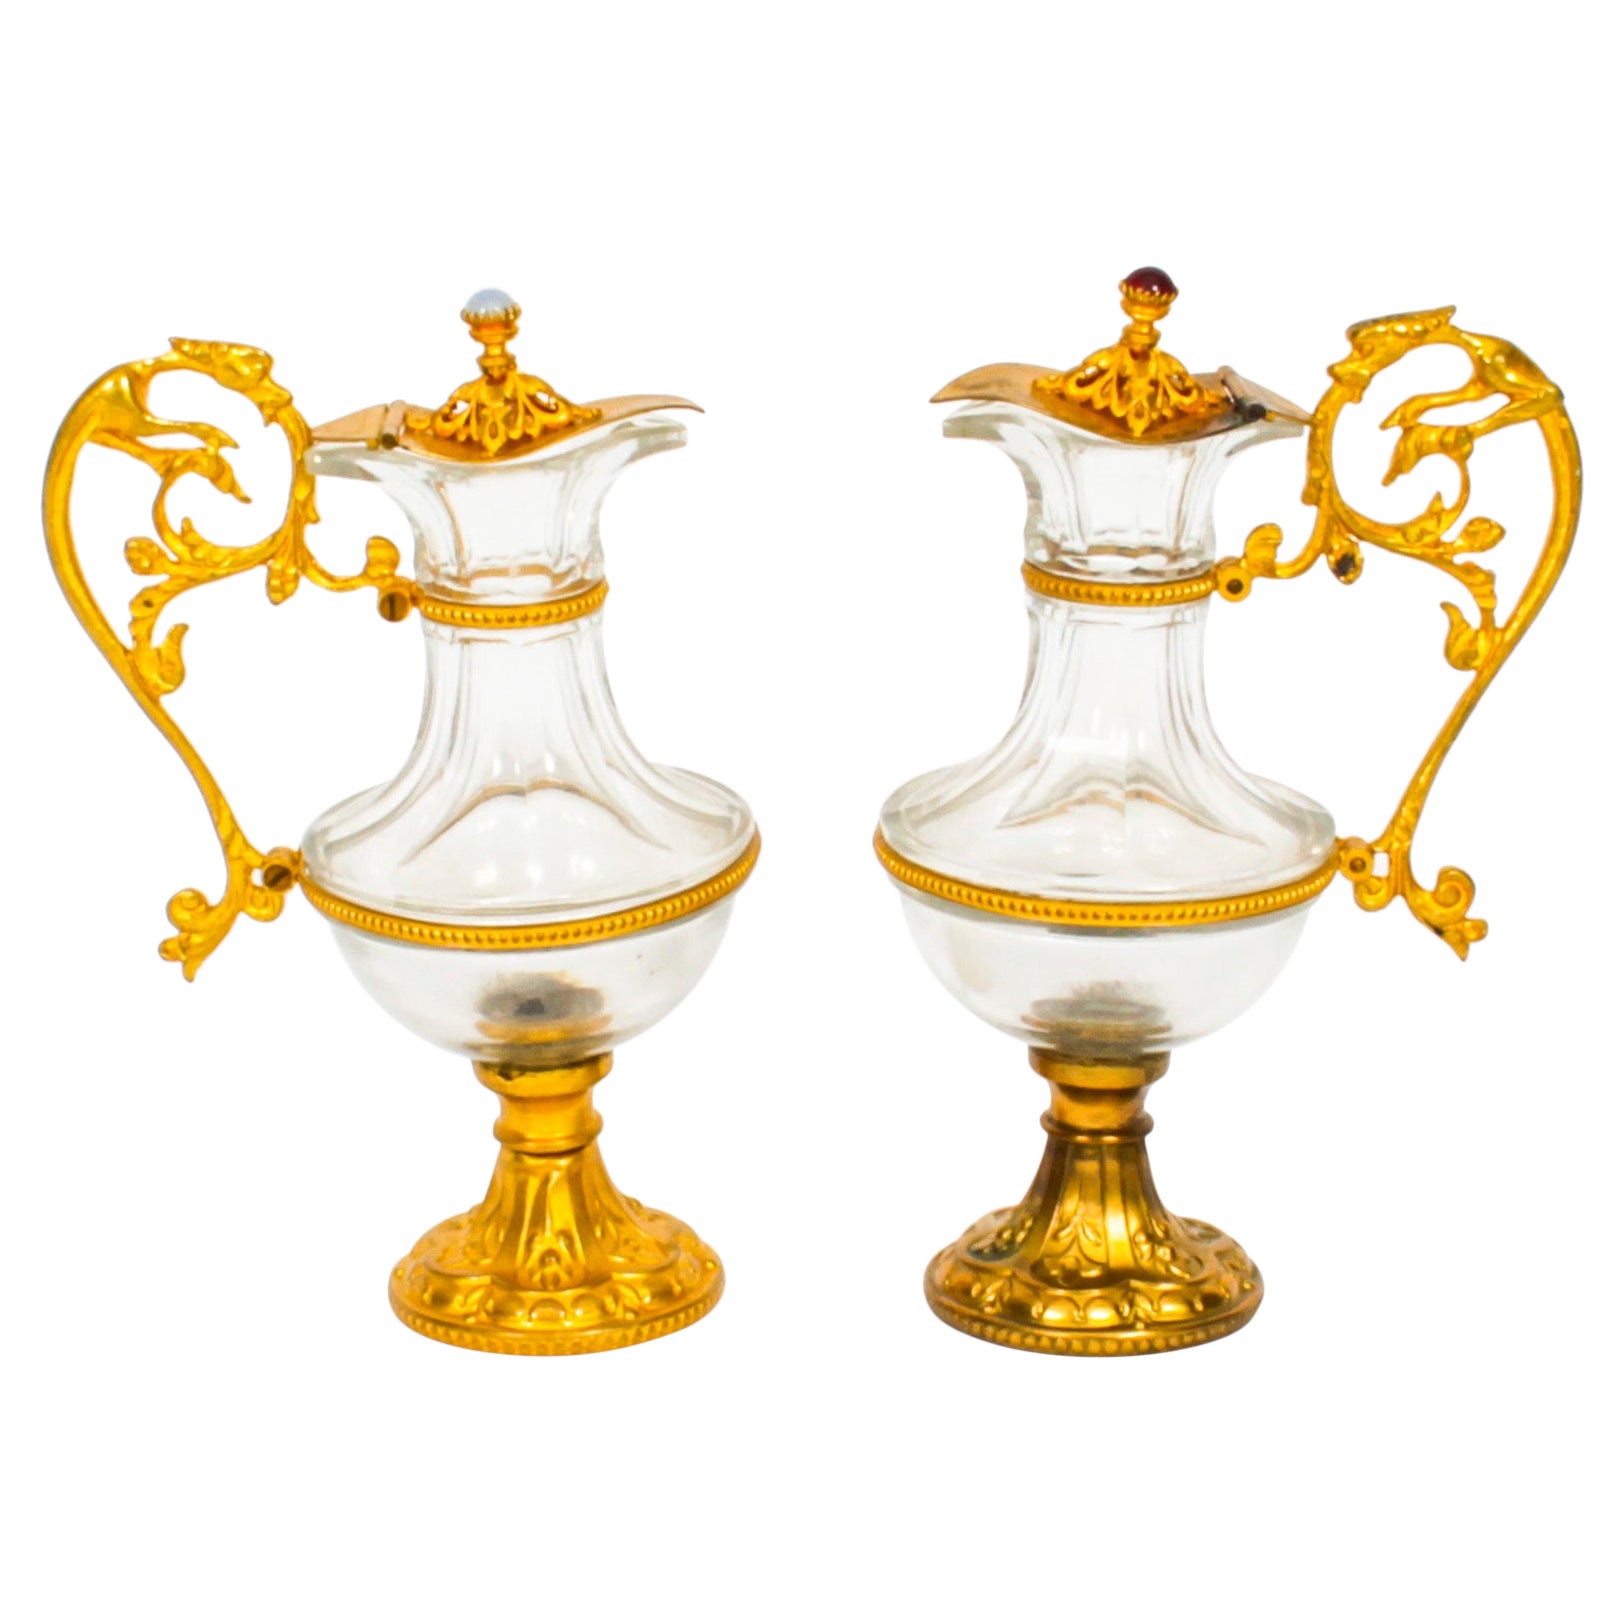 Antique Pair of French Ormolu & Glass Ewers, 19th Century For Sale